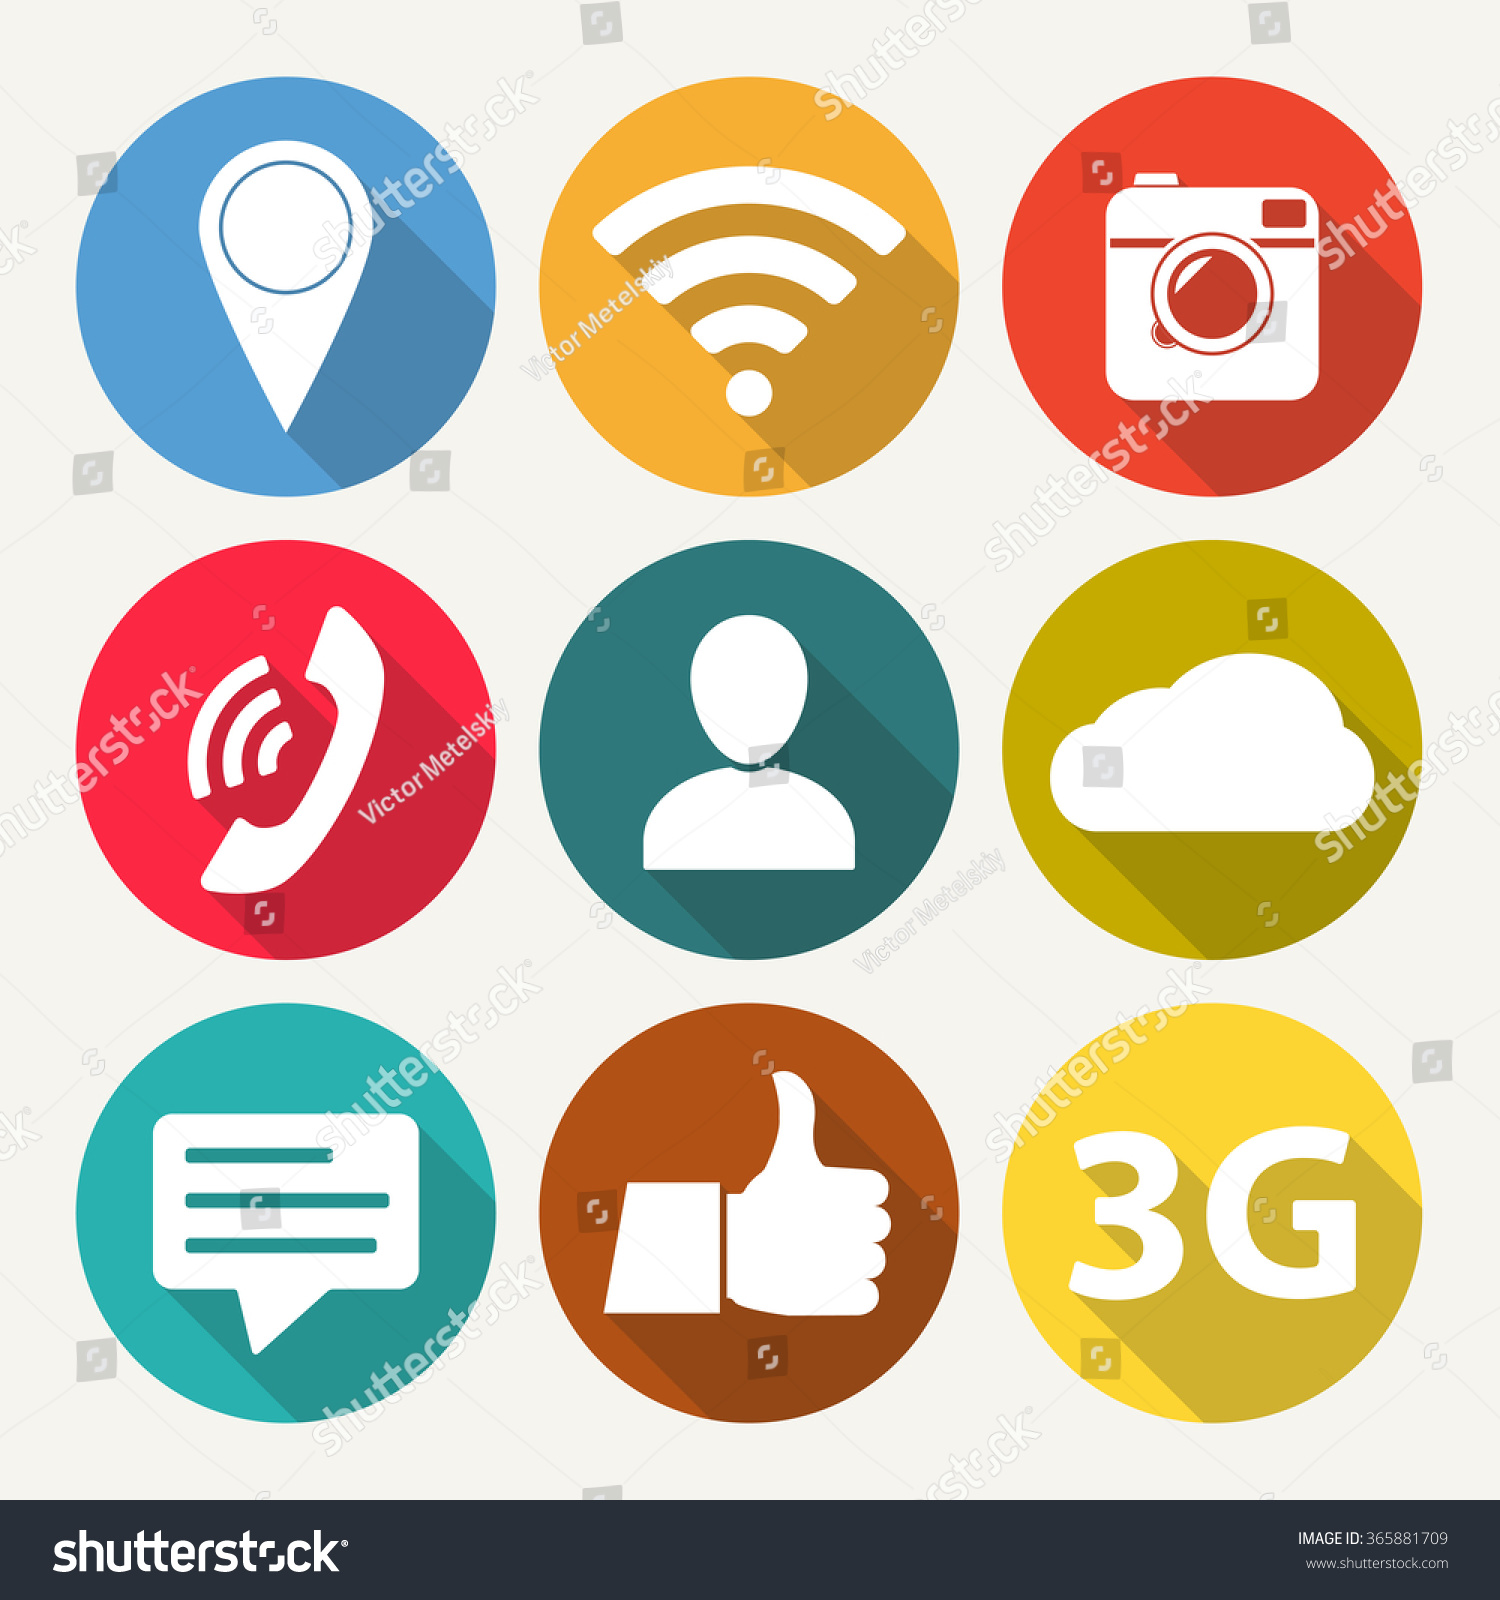 Social network icon set. Media network symbols in flat design with long shadow. #365881709